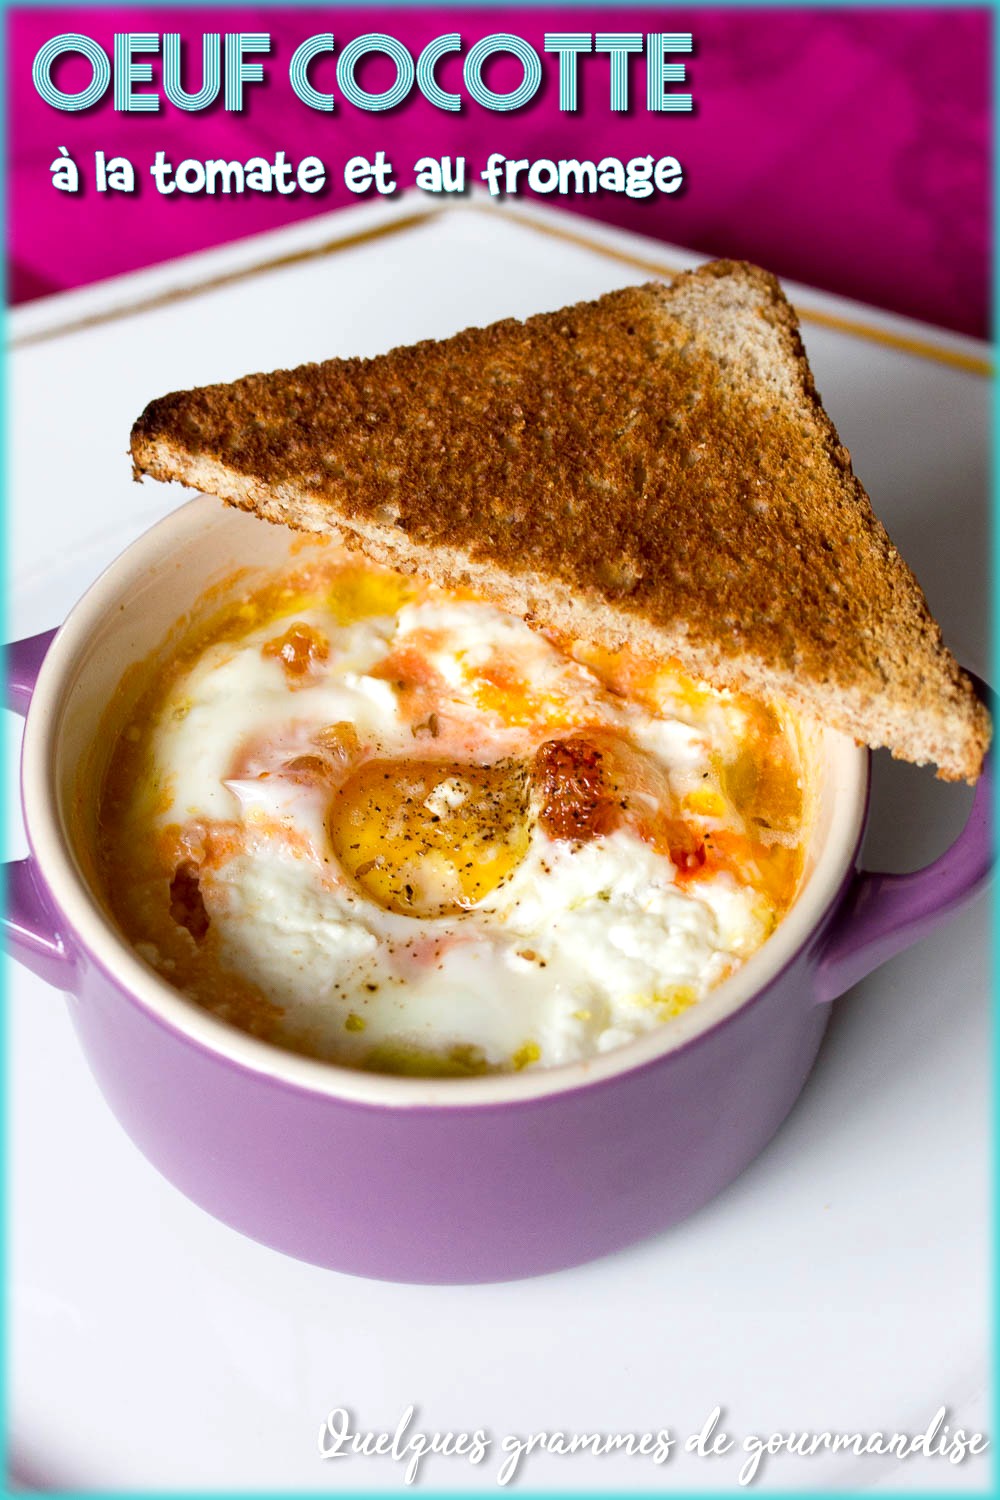 oeuf cocotte tomate fromage portrait